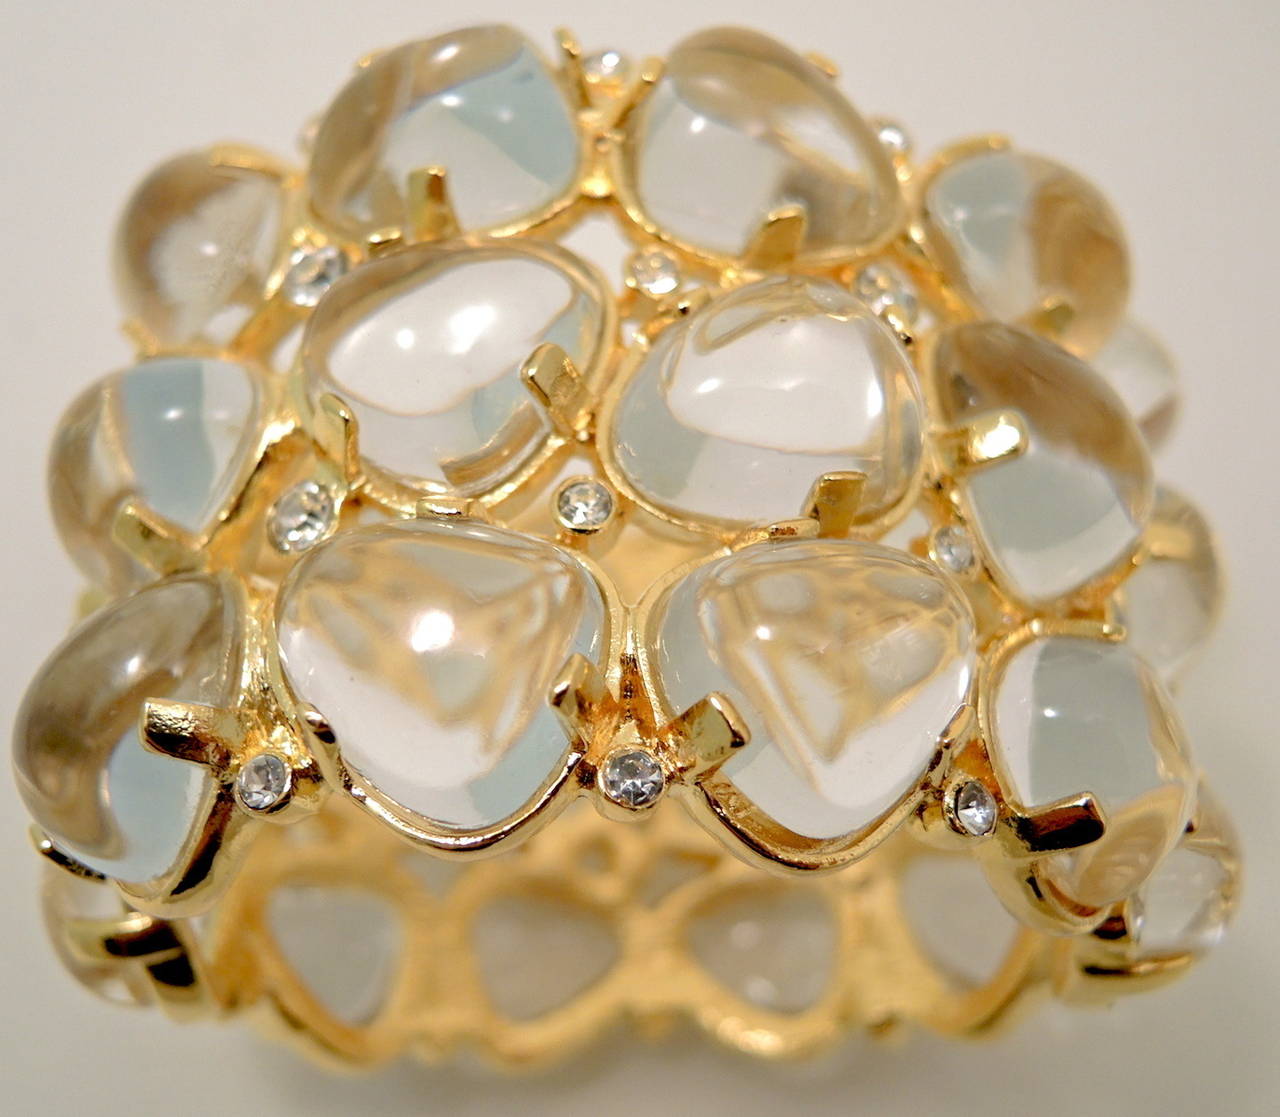 Several years ago when these bracelets were created I bought as many as I could find. Lucky me I found a few great bracelets this month. This signed Kenneth J. Lane bracelet cabochon cut clear resin stones with clear rhinestone accents in a